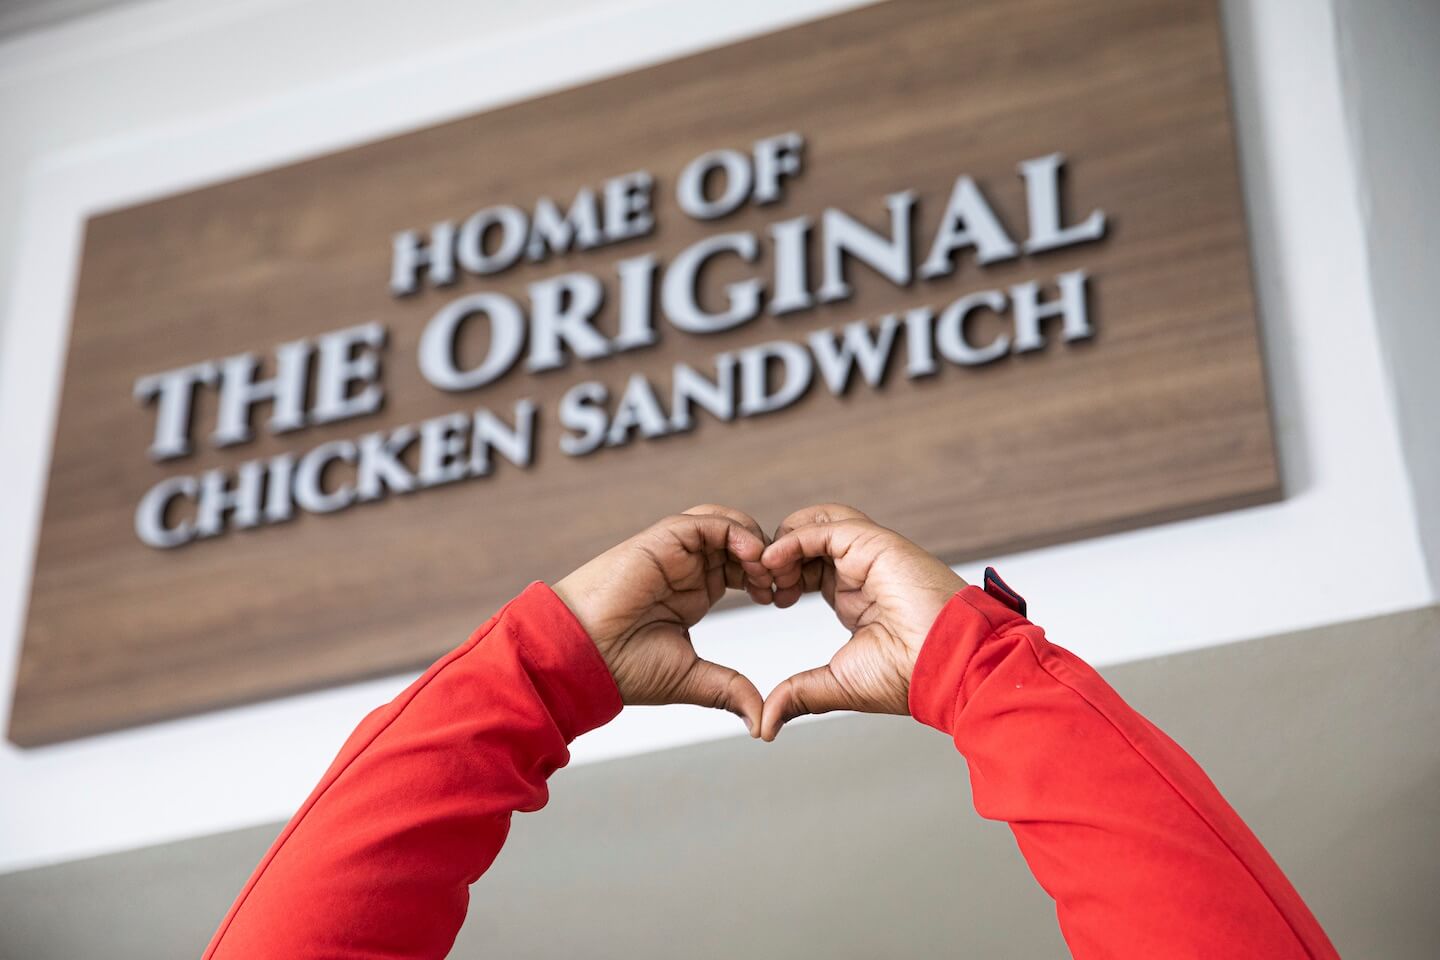 A Team Member holding a heart up with their hands in front of a sign reading "Home of the Original Chicken Sandwich.